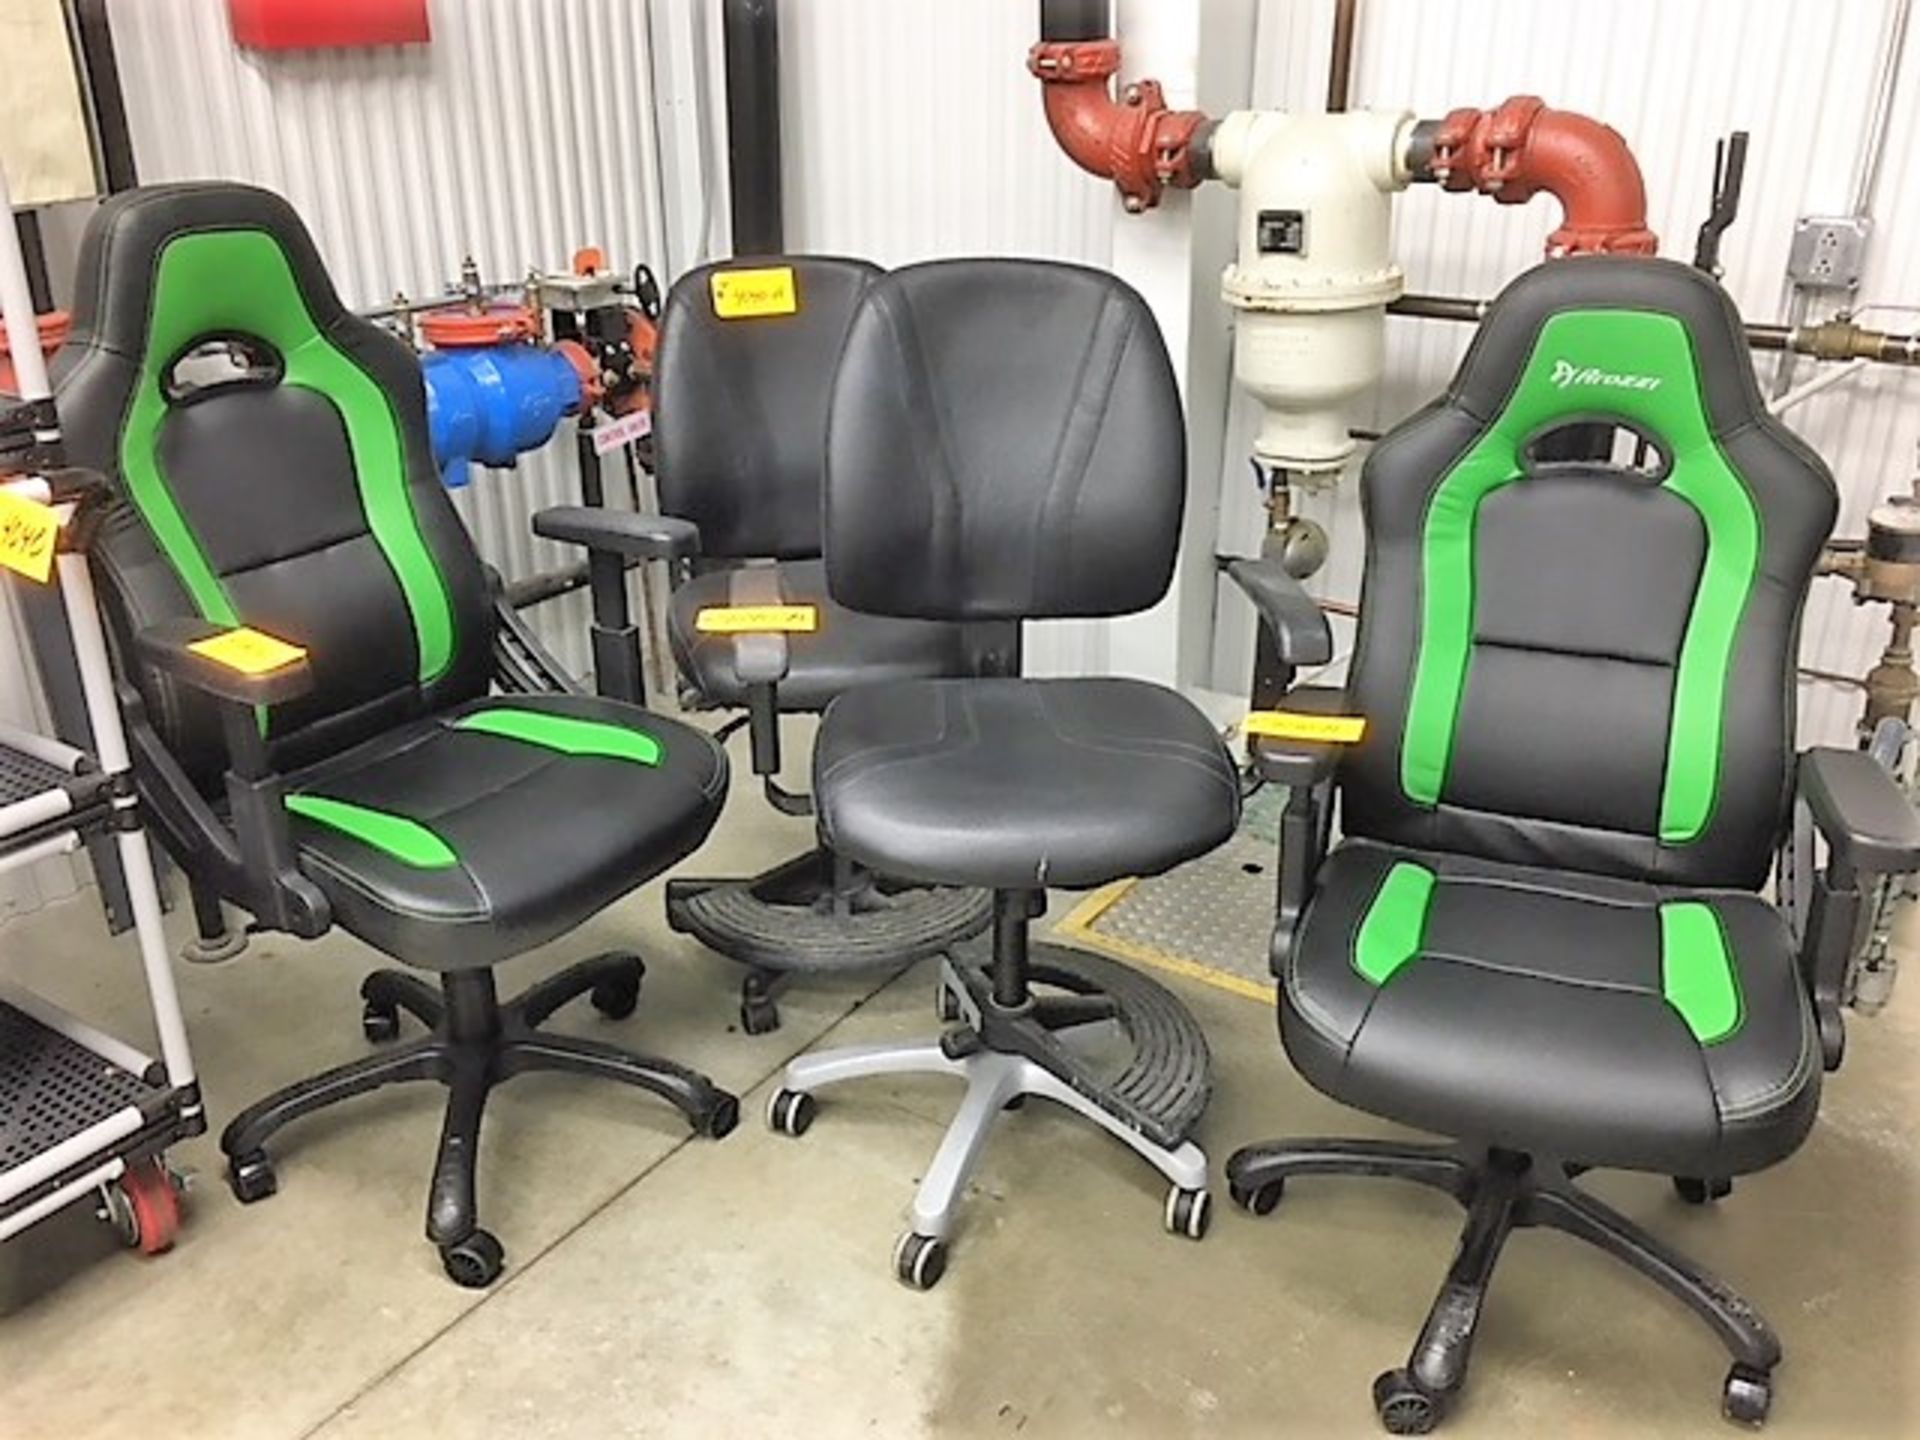 (2) AROZZI GAMING CHAIRS & (2) LAB TYPE HEAVY DUTY CHAIRS